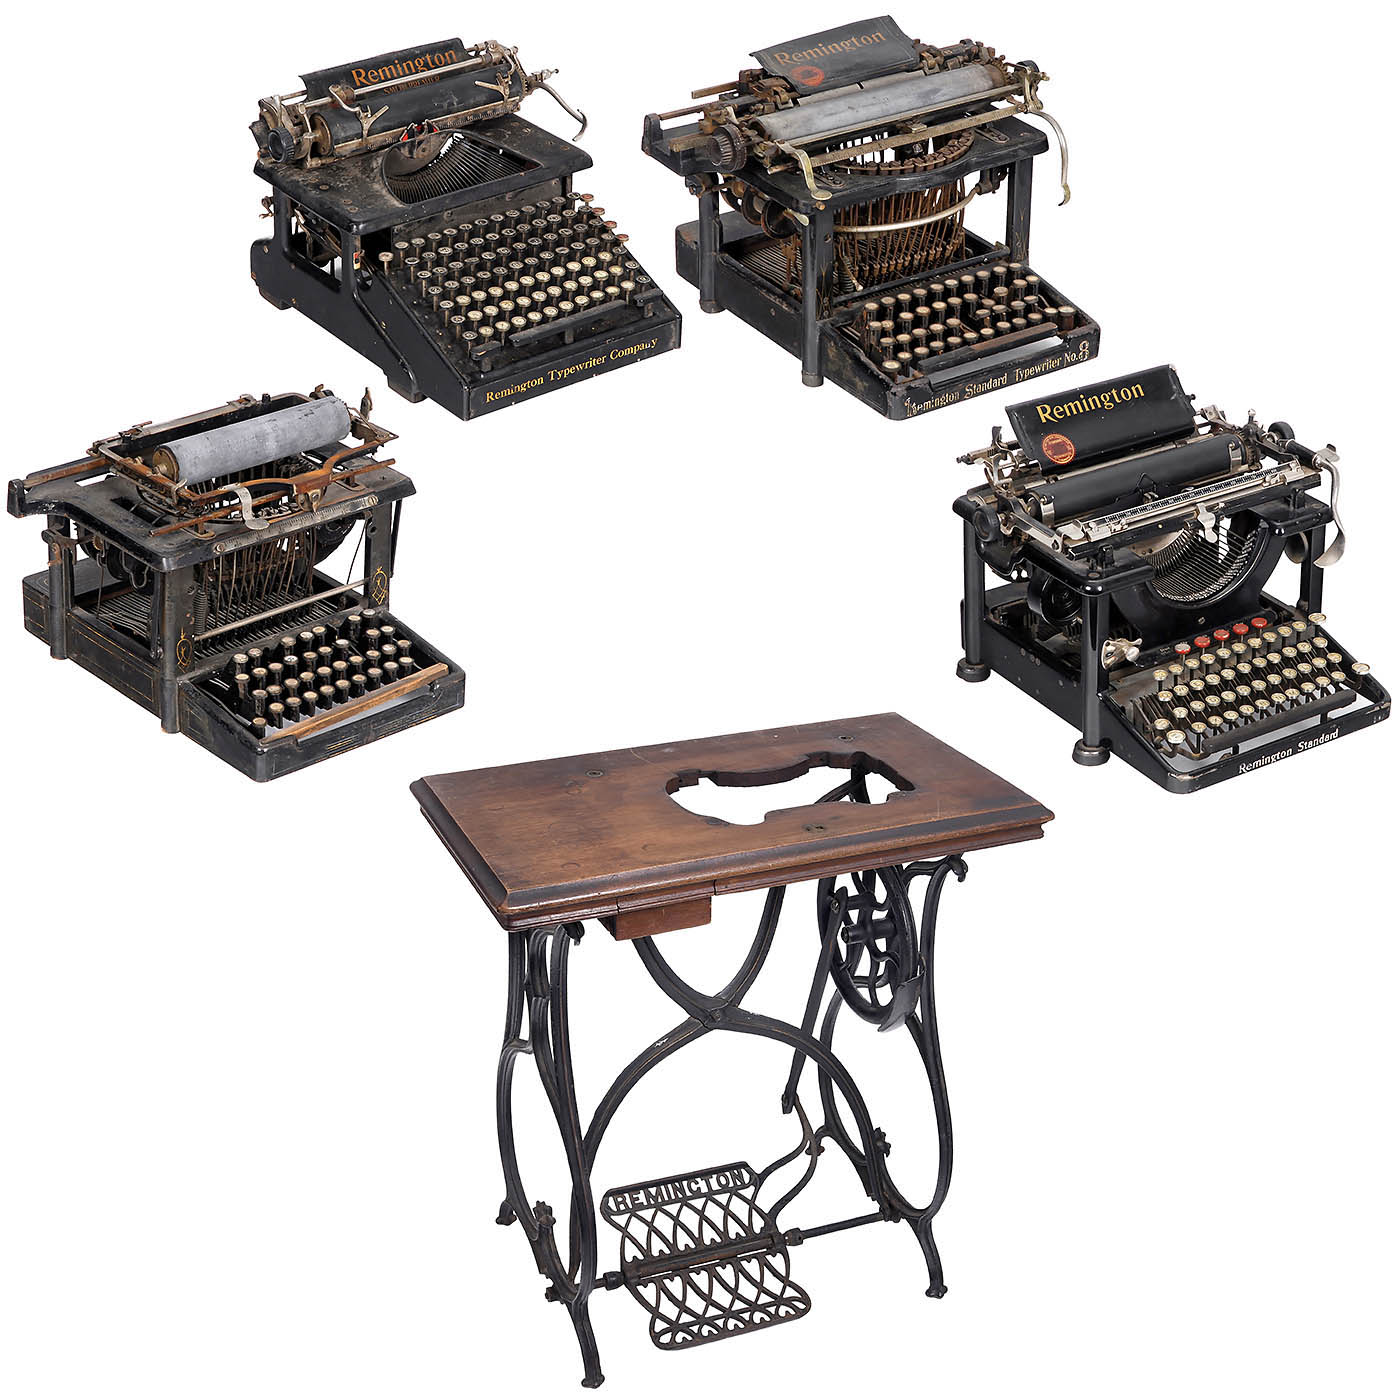 4 Remington Typewriters and 1 Table